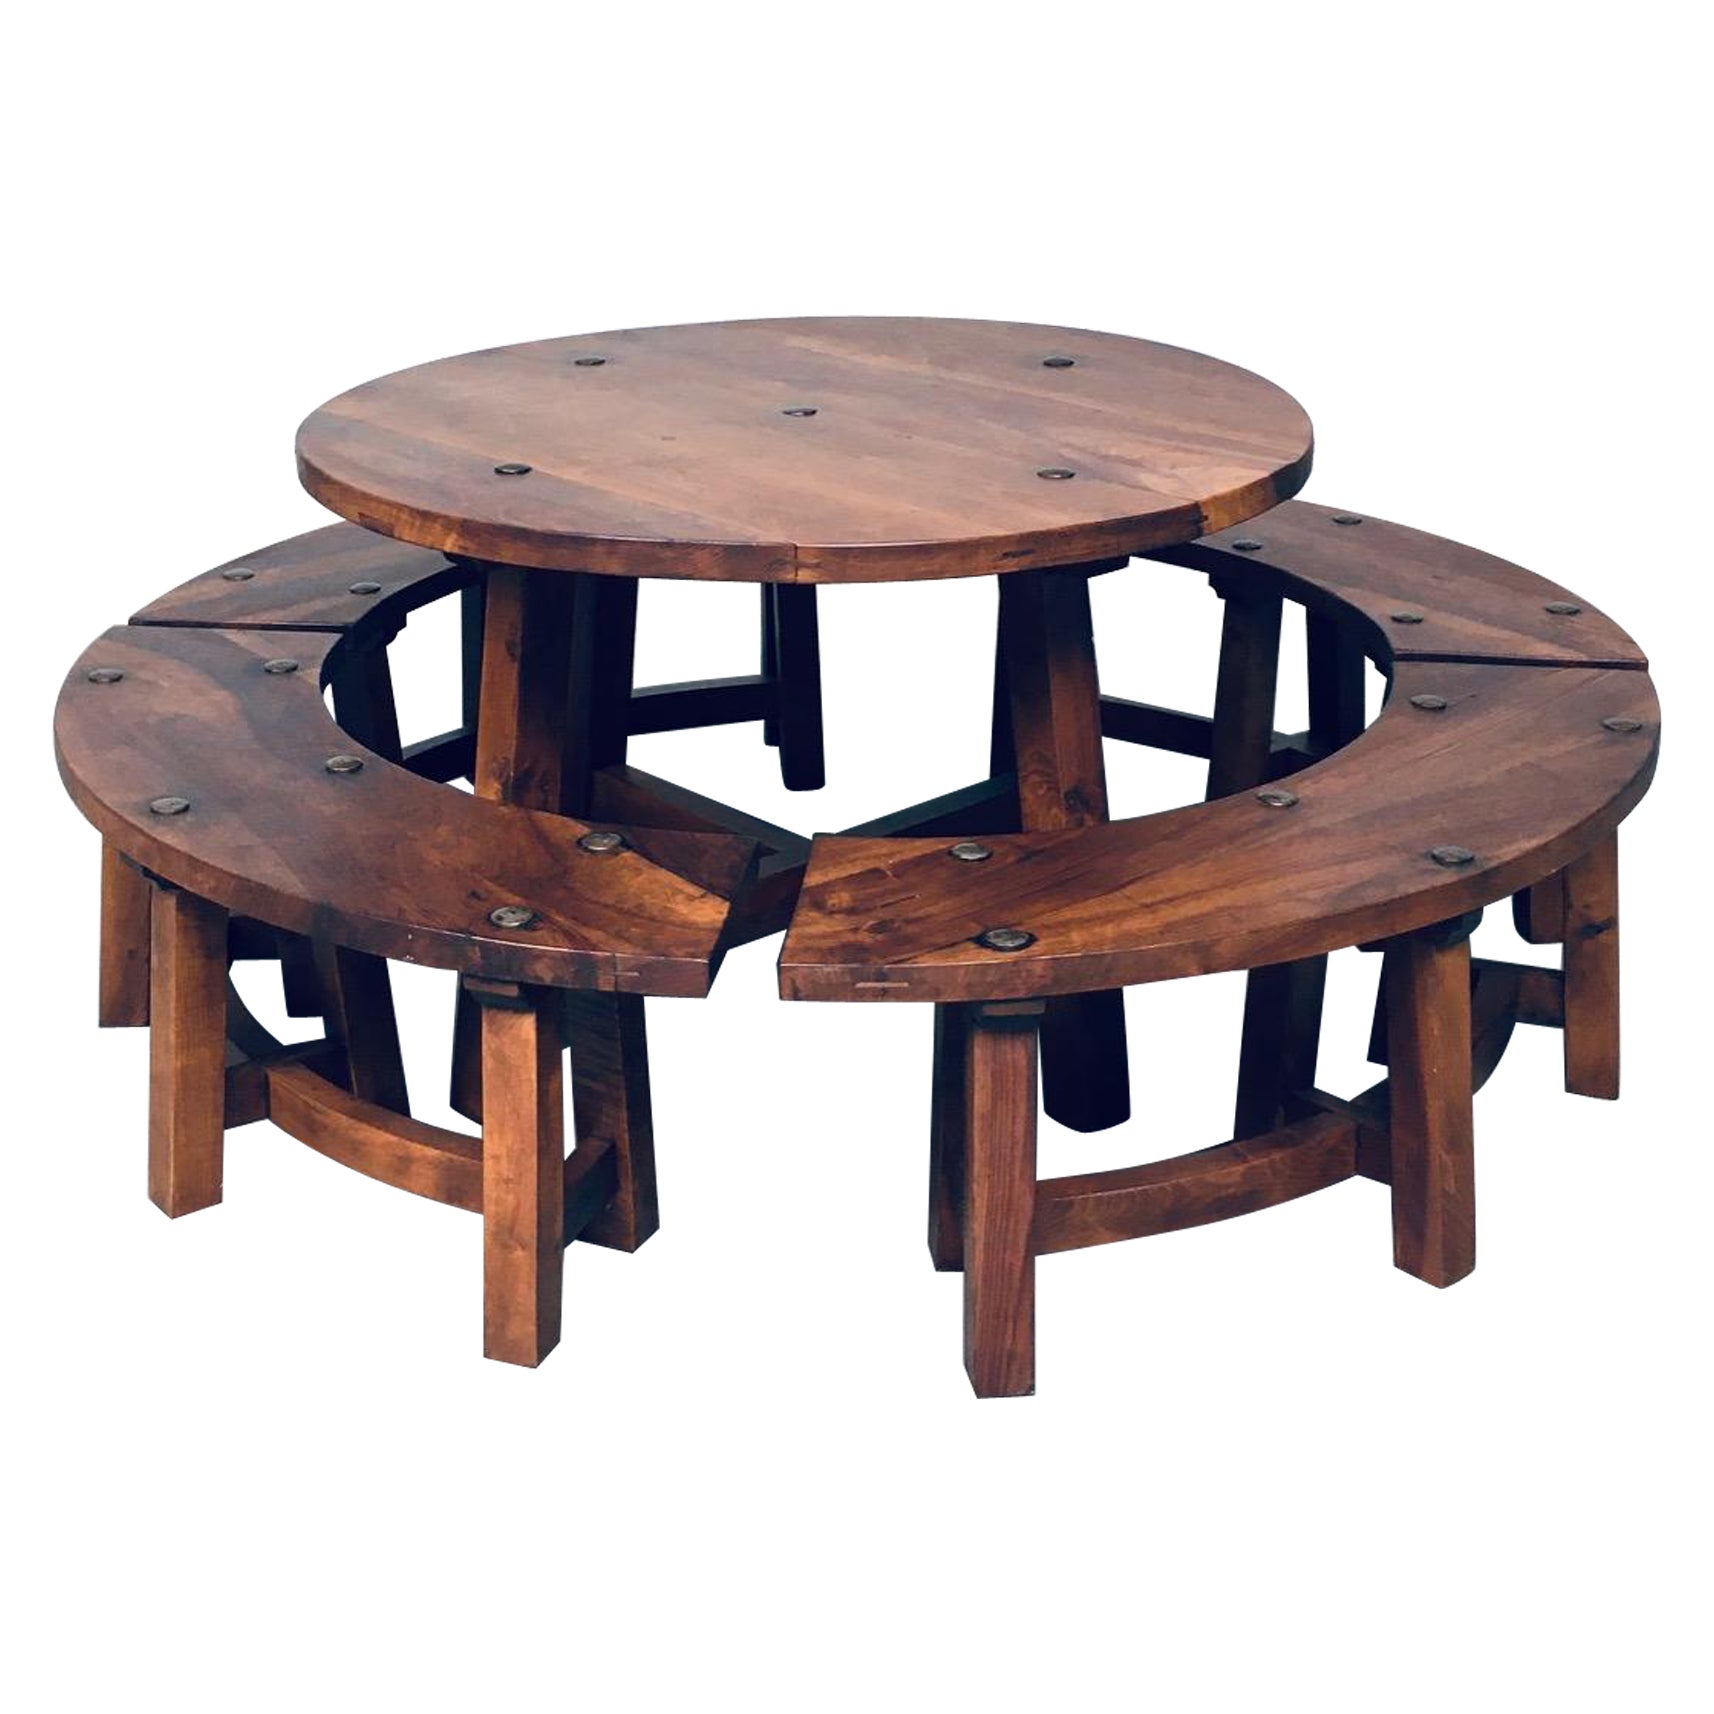 Midcentury French Alps Chalet Style Round Table & 4 Benches, France 1950's